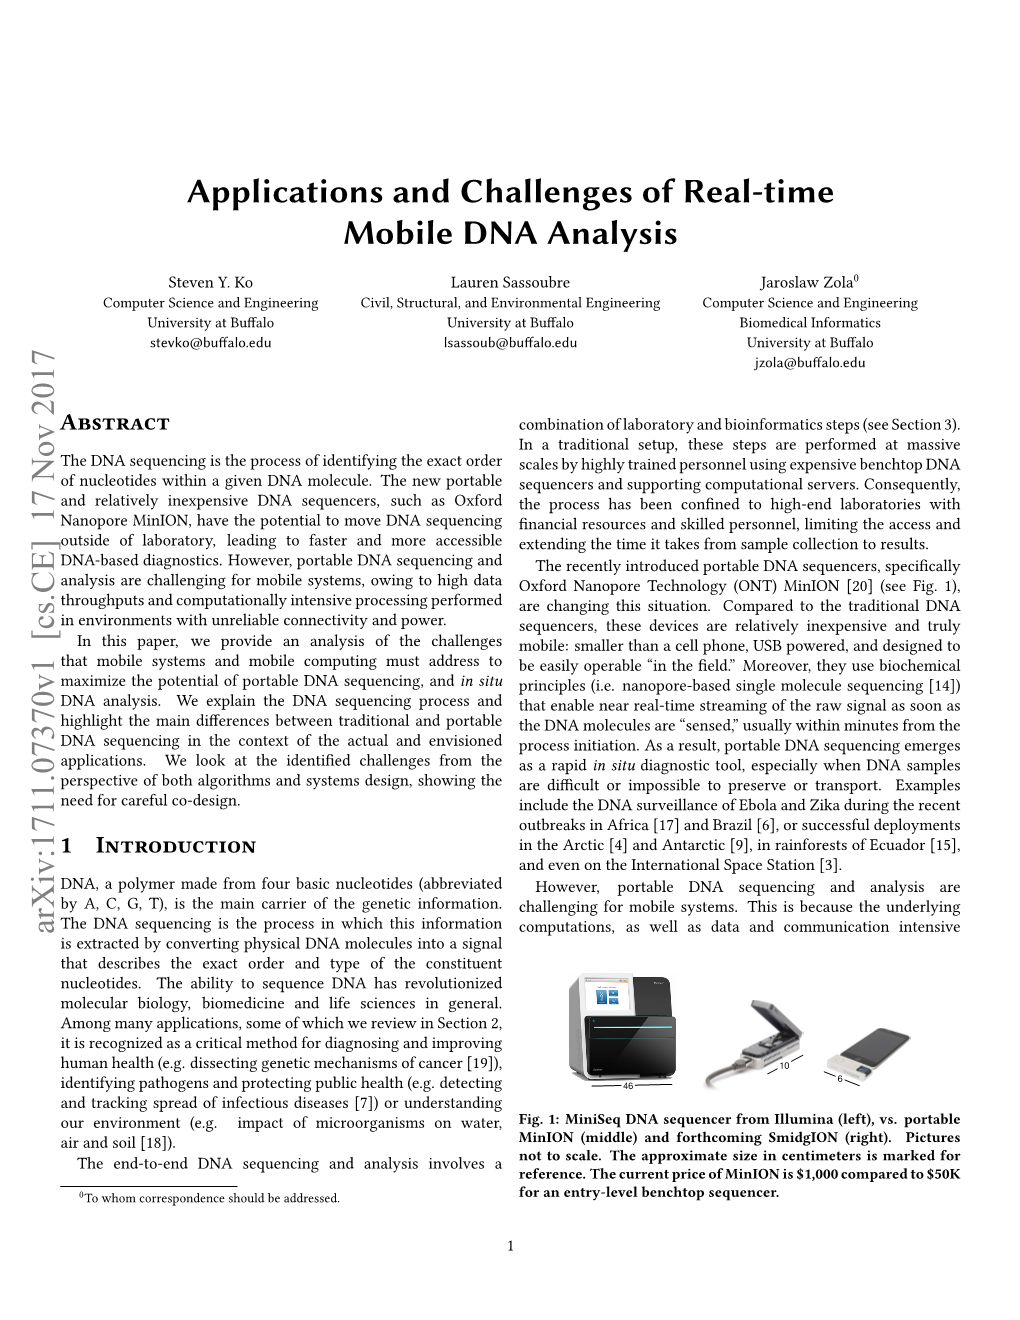 Applications and Challenges of Real-Time Mobile DNA Analysis